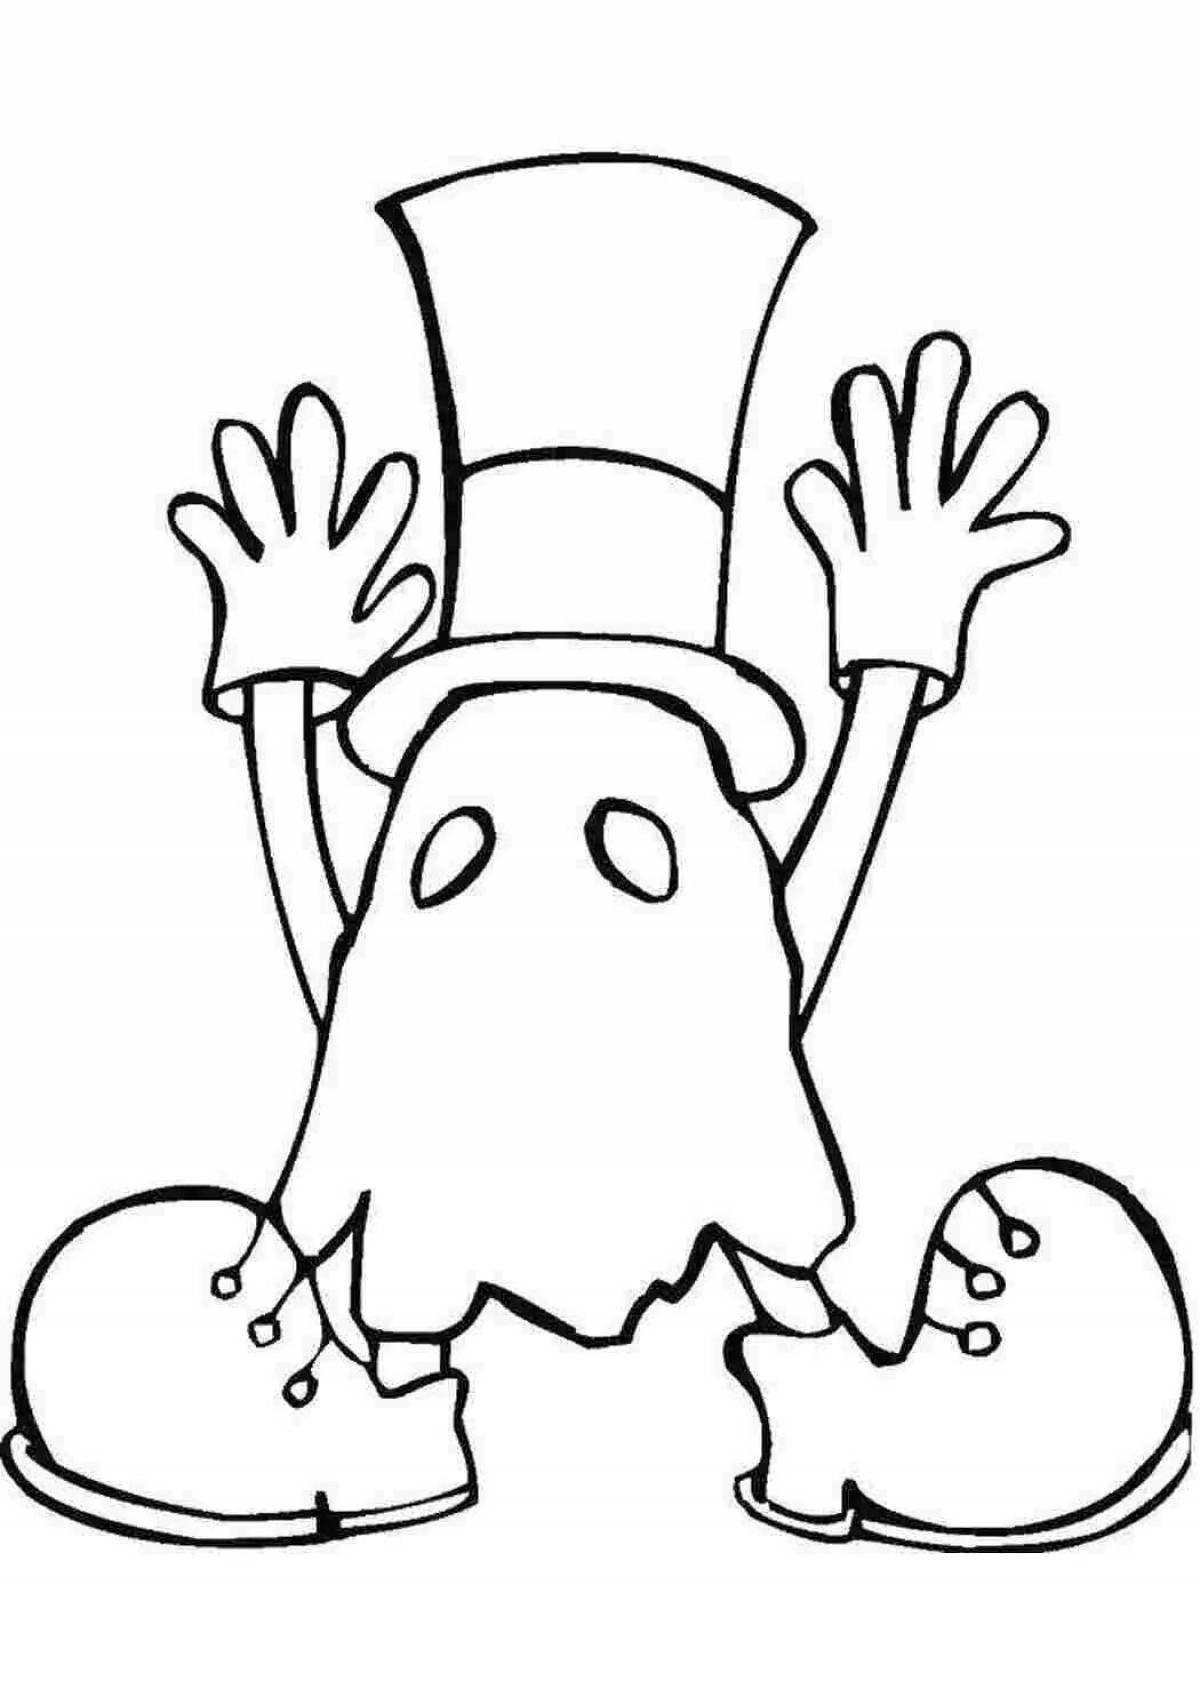 Sinister ghost coloring book for kids